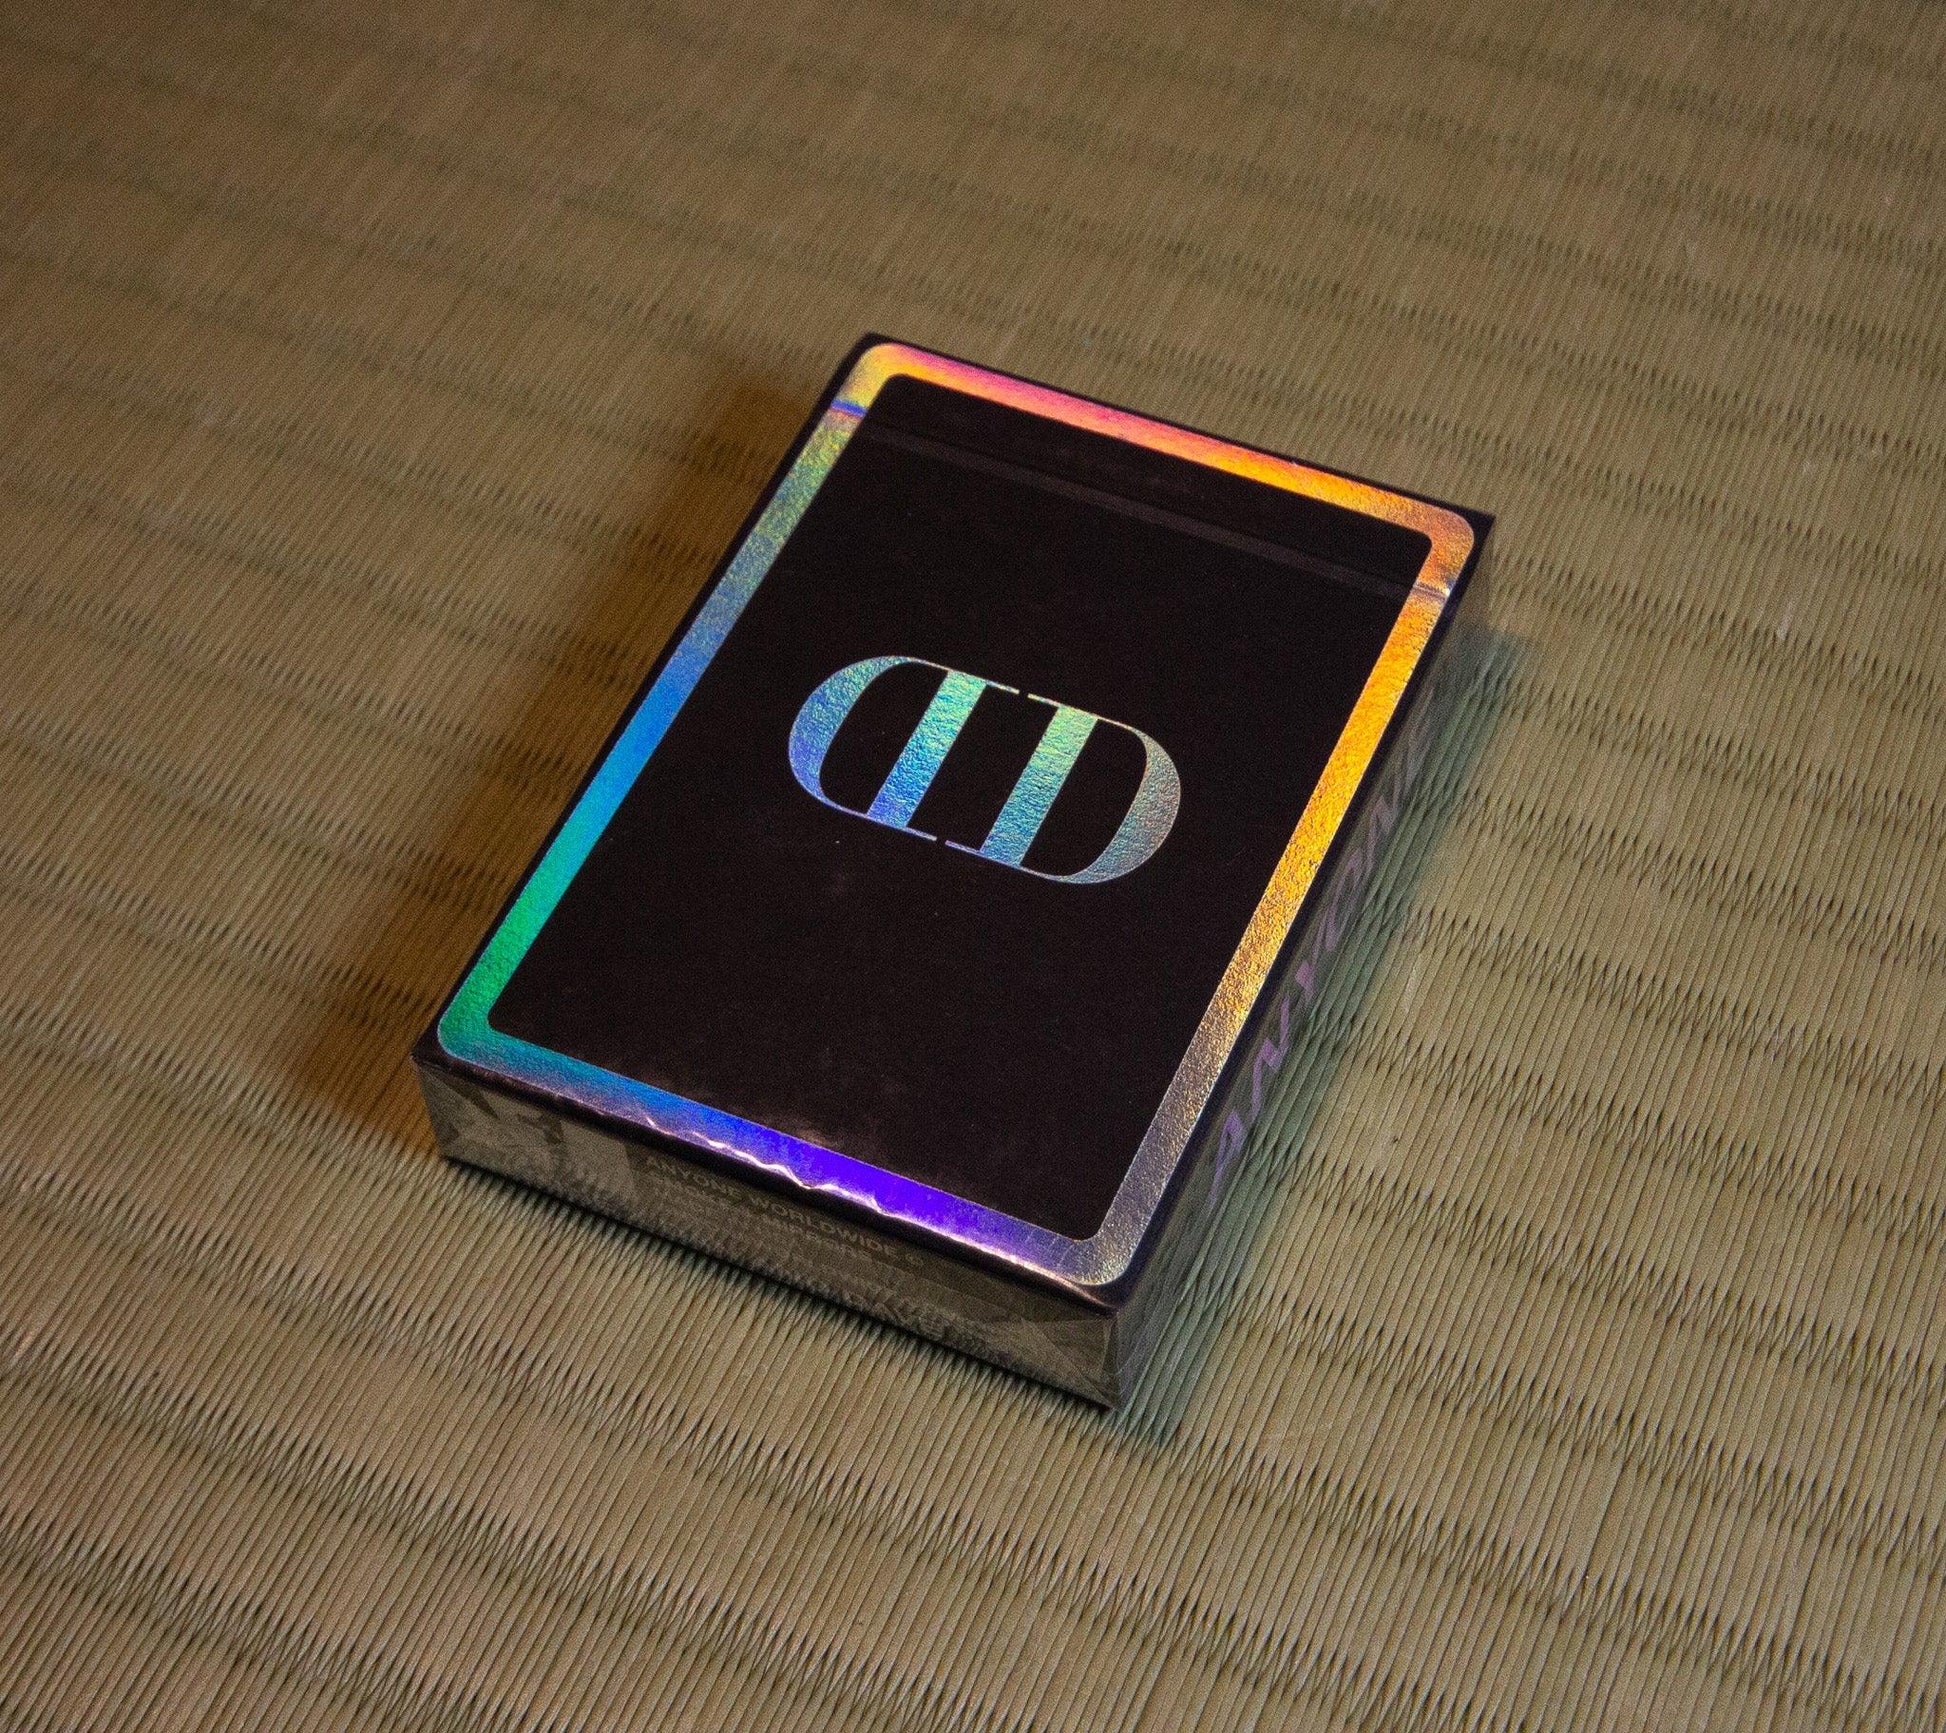 Anyone mirror - Holographic foil (regular) Playing Cards by Anyone Worldwide - Deckita Decks